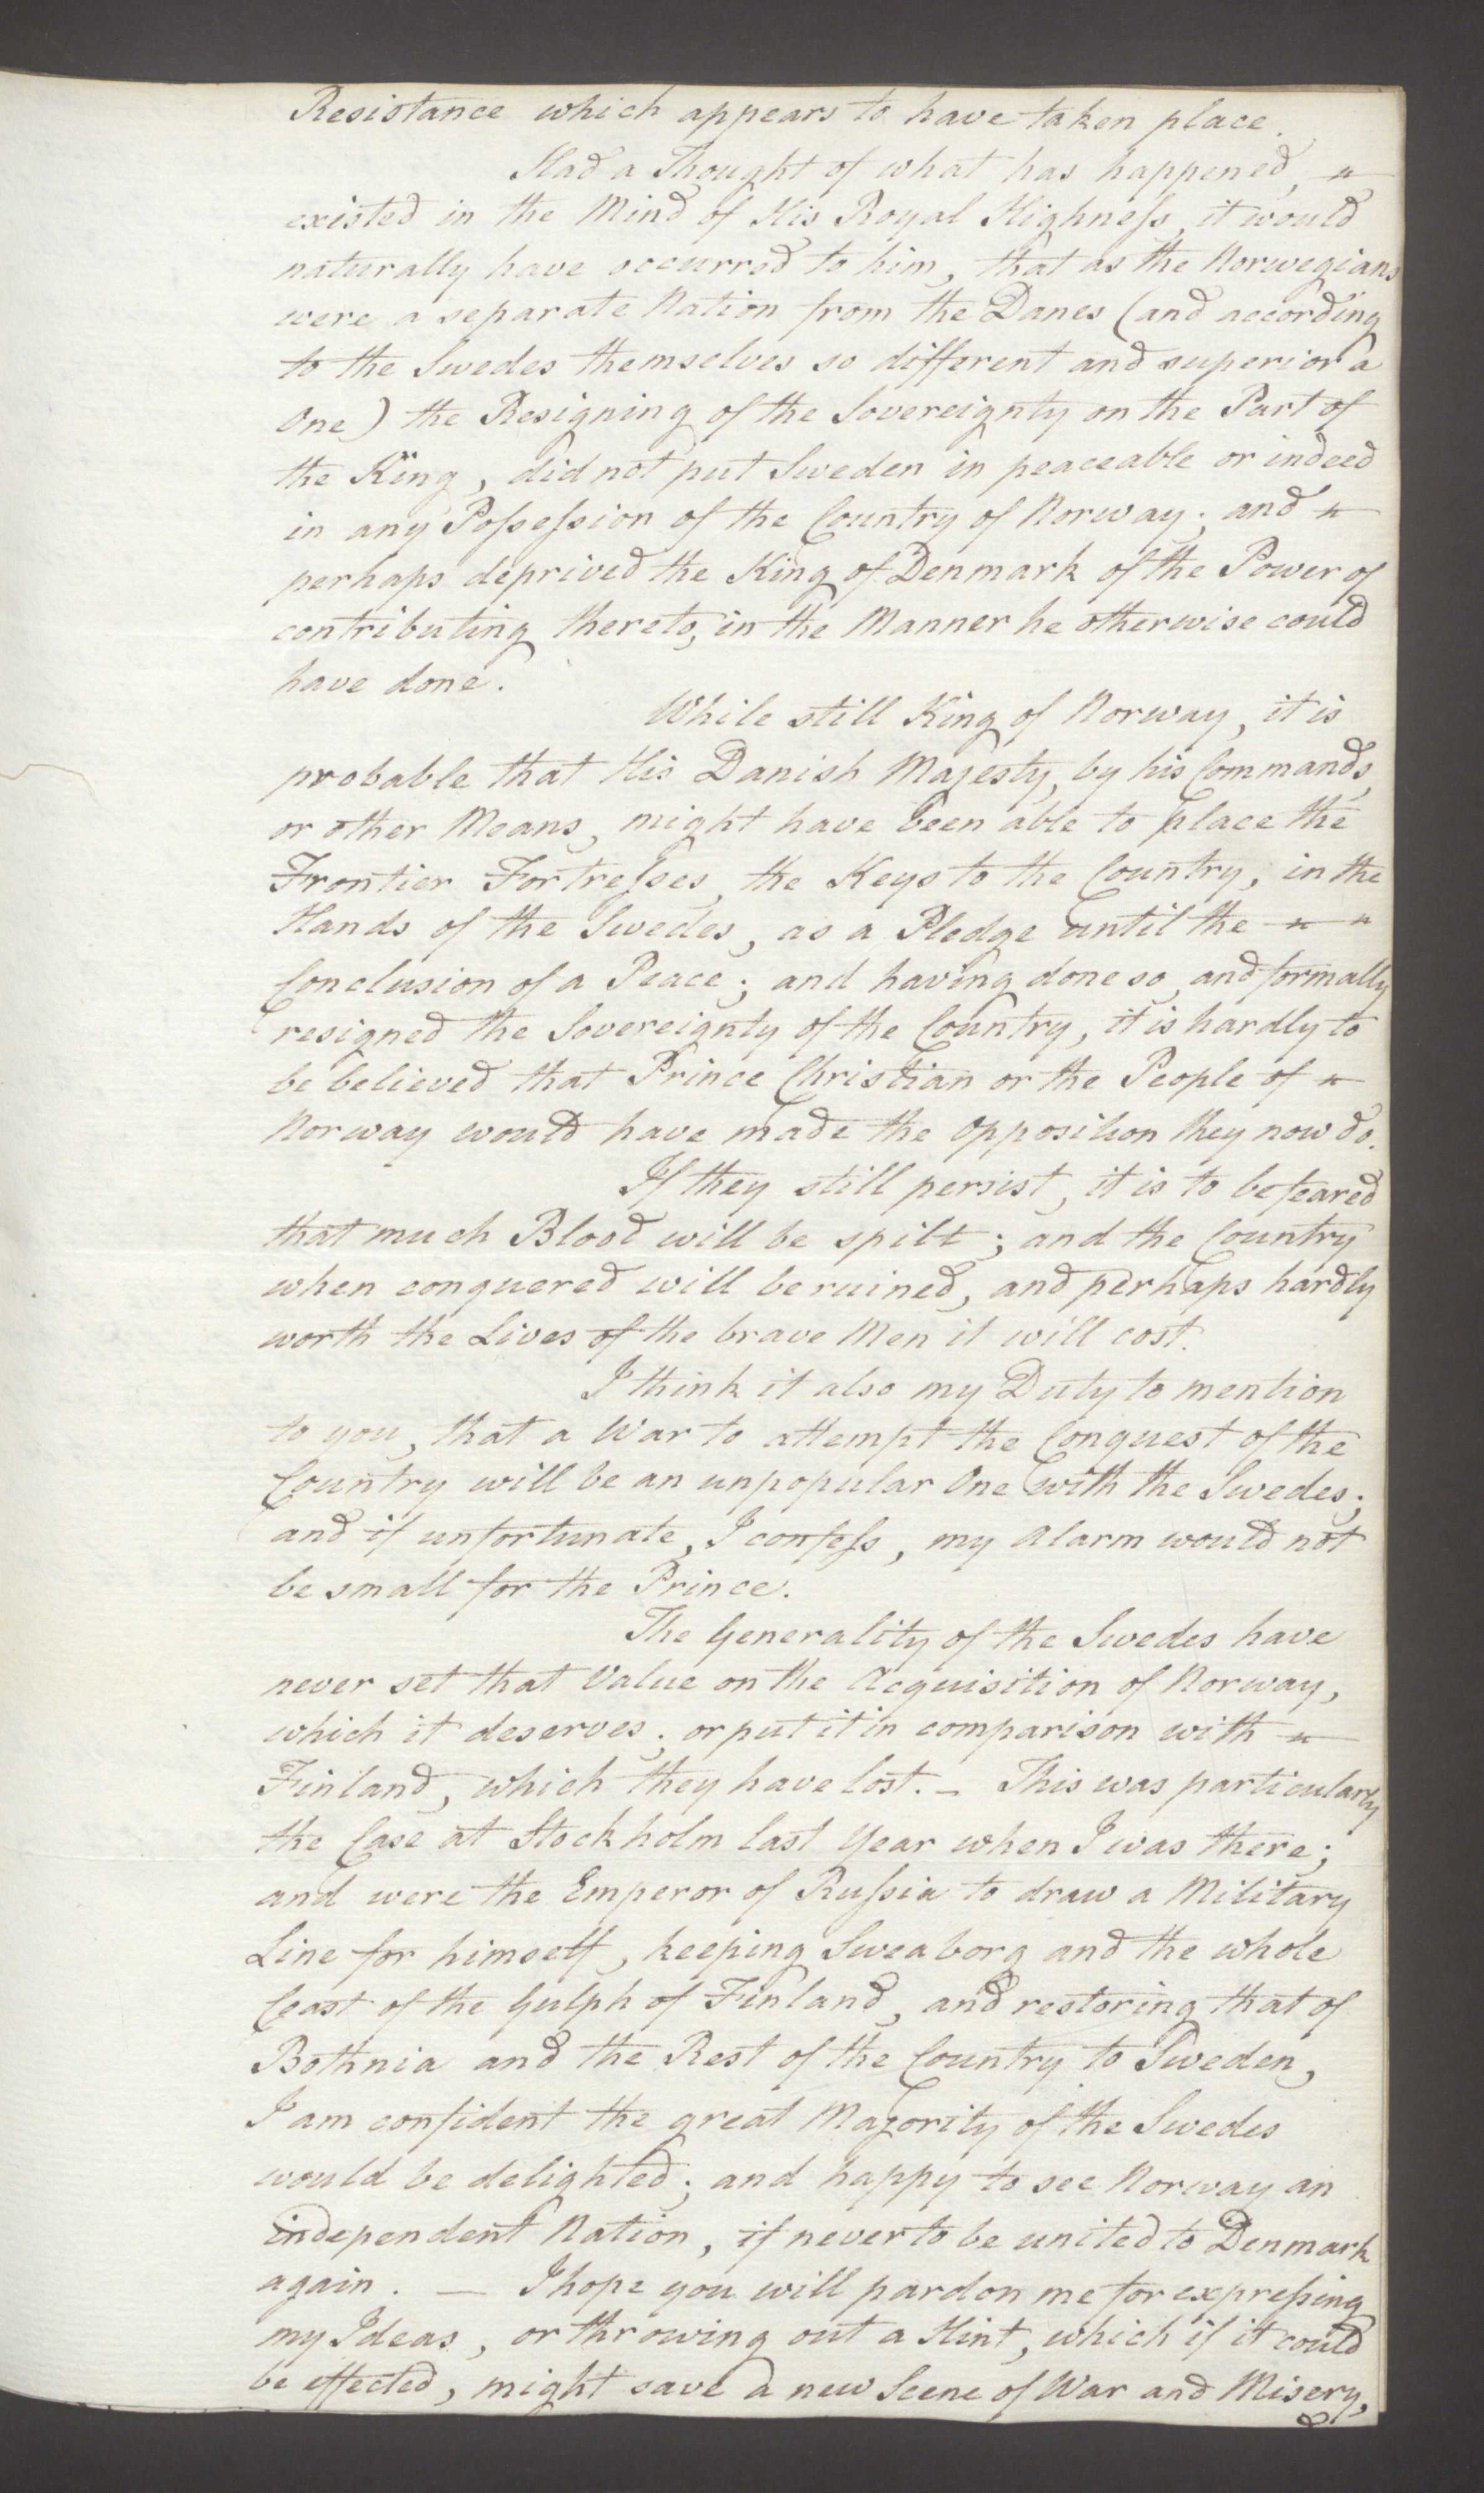 Foreign Office*, UKA/-/FO 38/16: Sir C. Gordon. Reports from Malmö, Jonkoping, and Helsingborg, 1814, s. 40